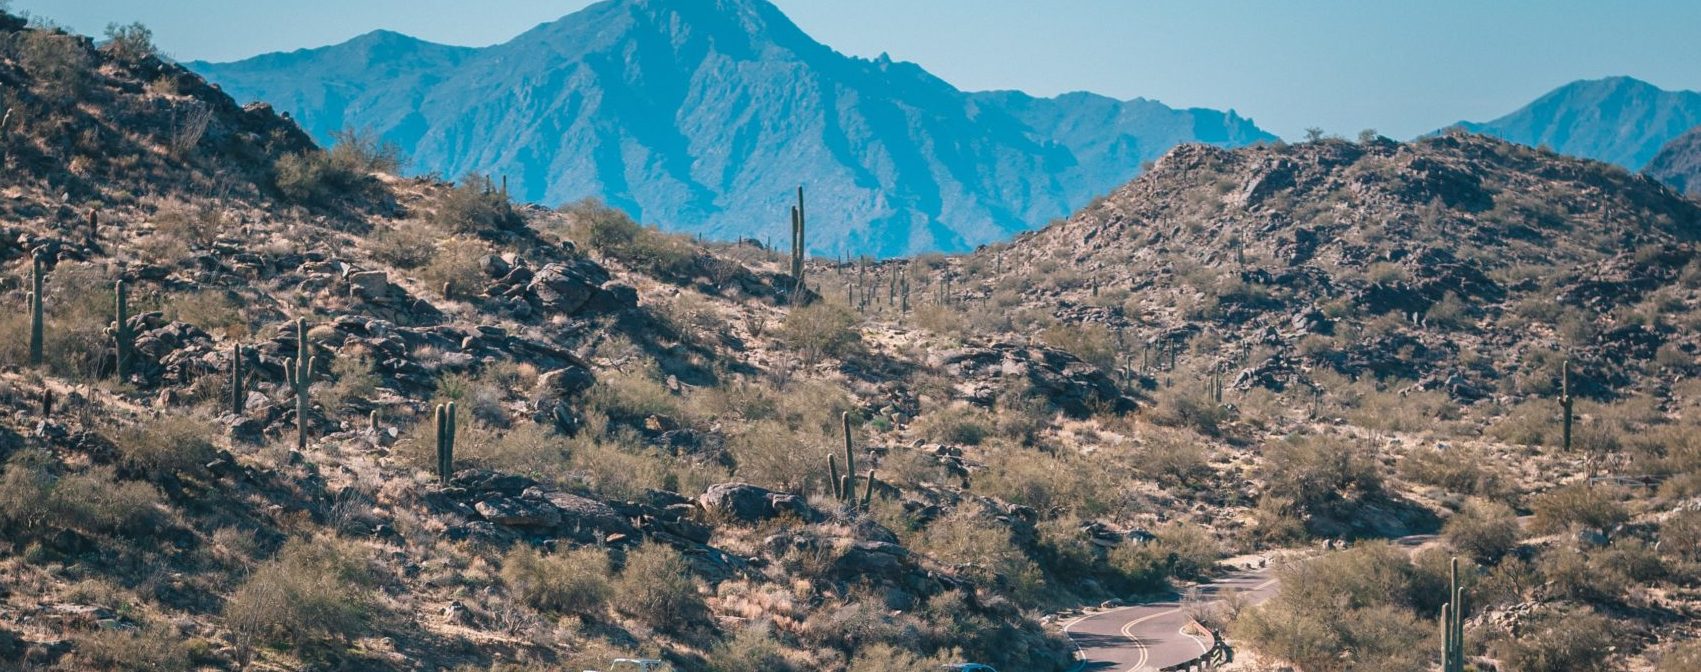 A desert landscape you will see from many spots with top Scottsdale views.